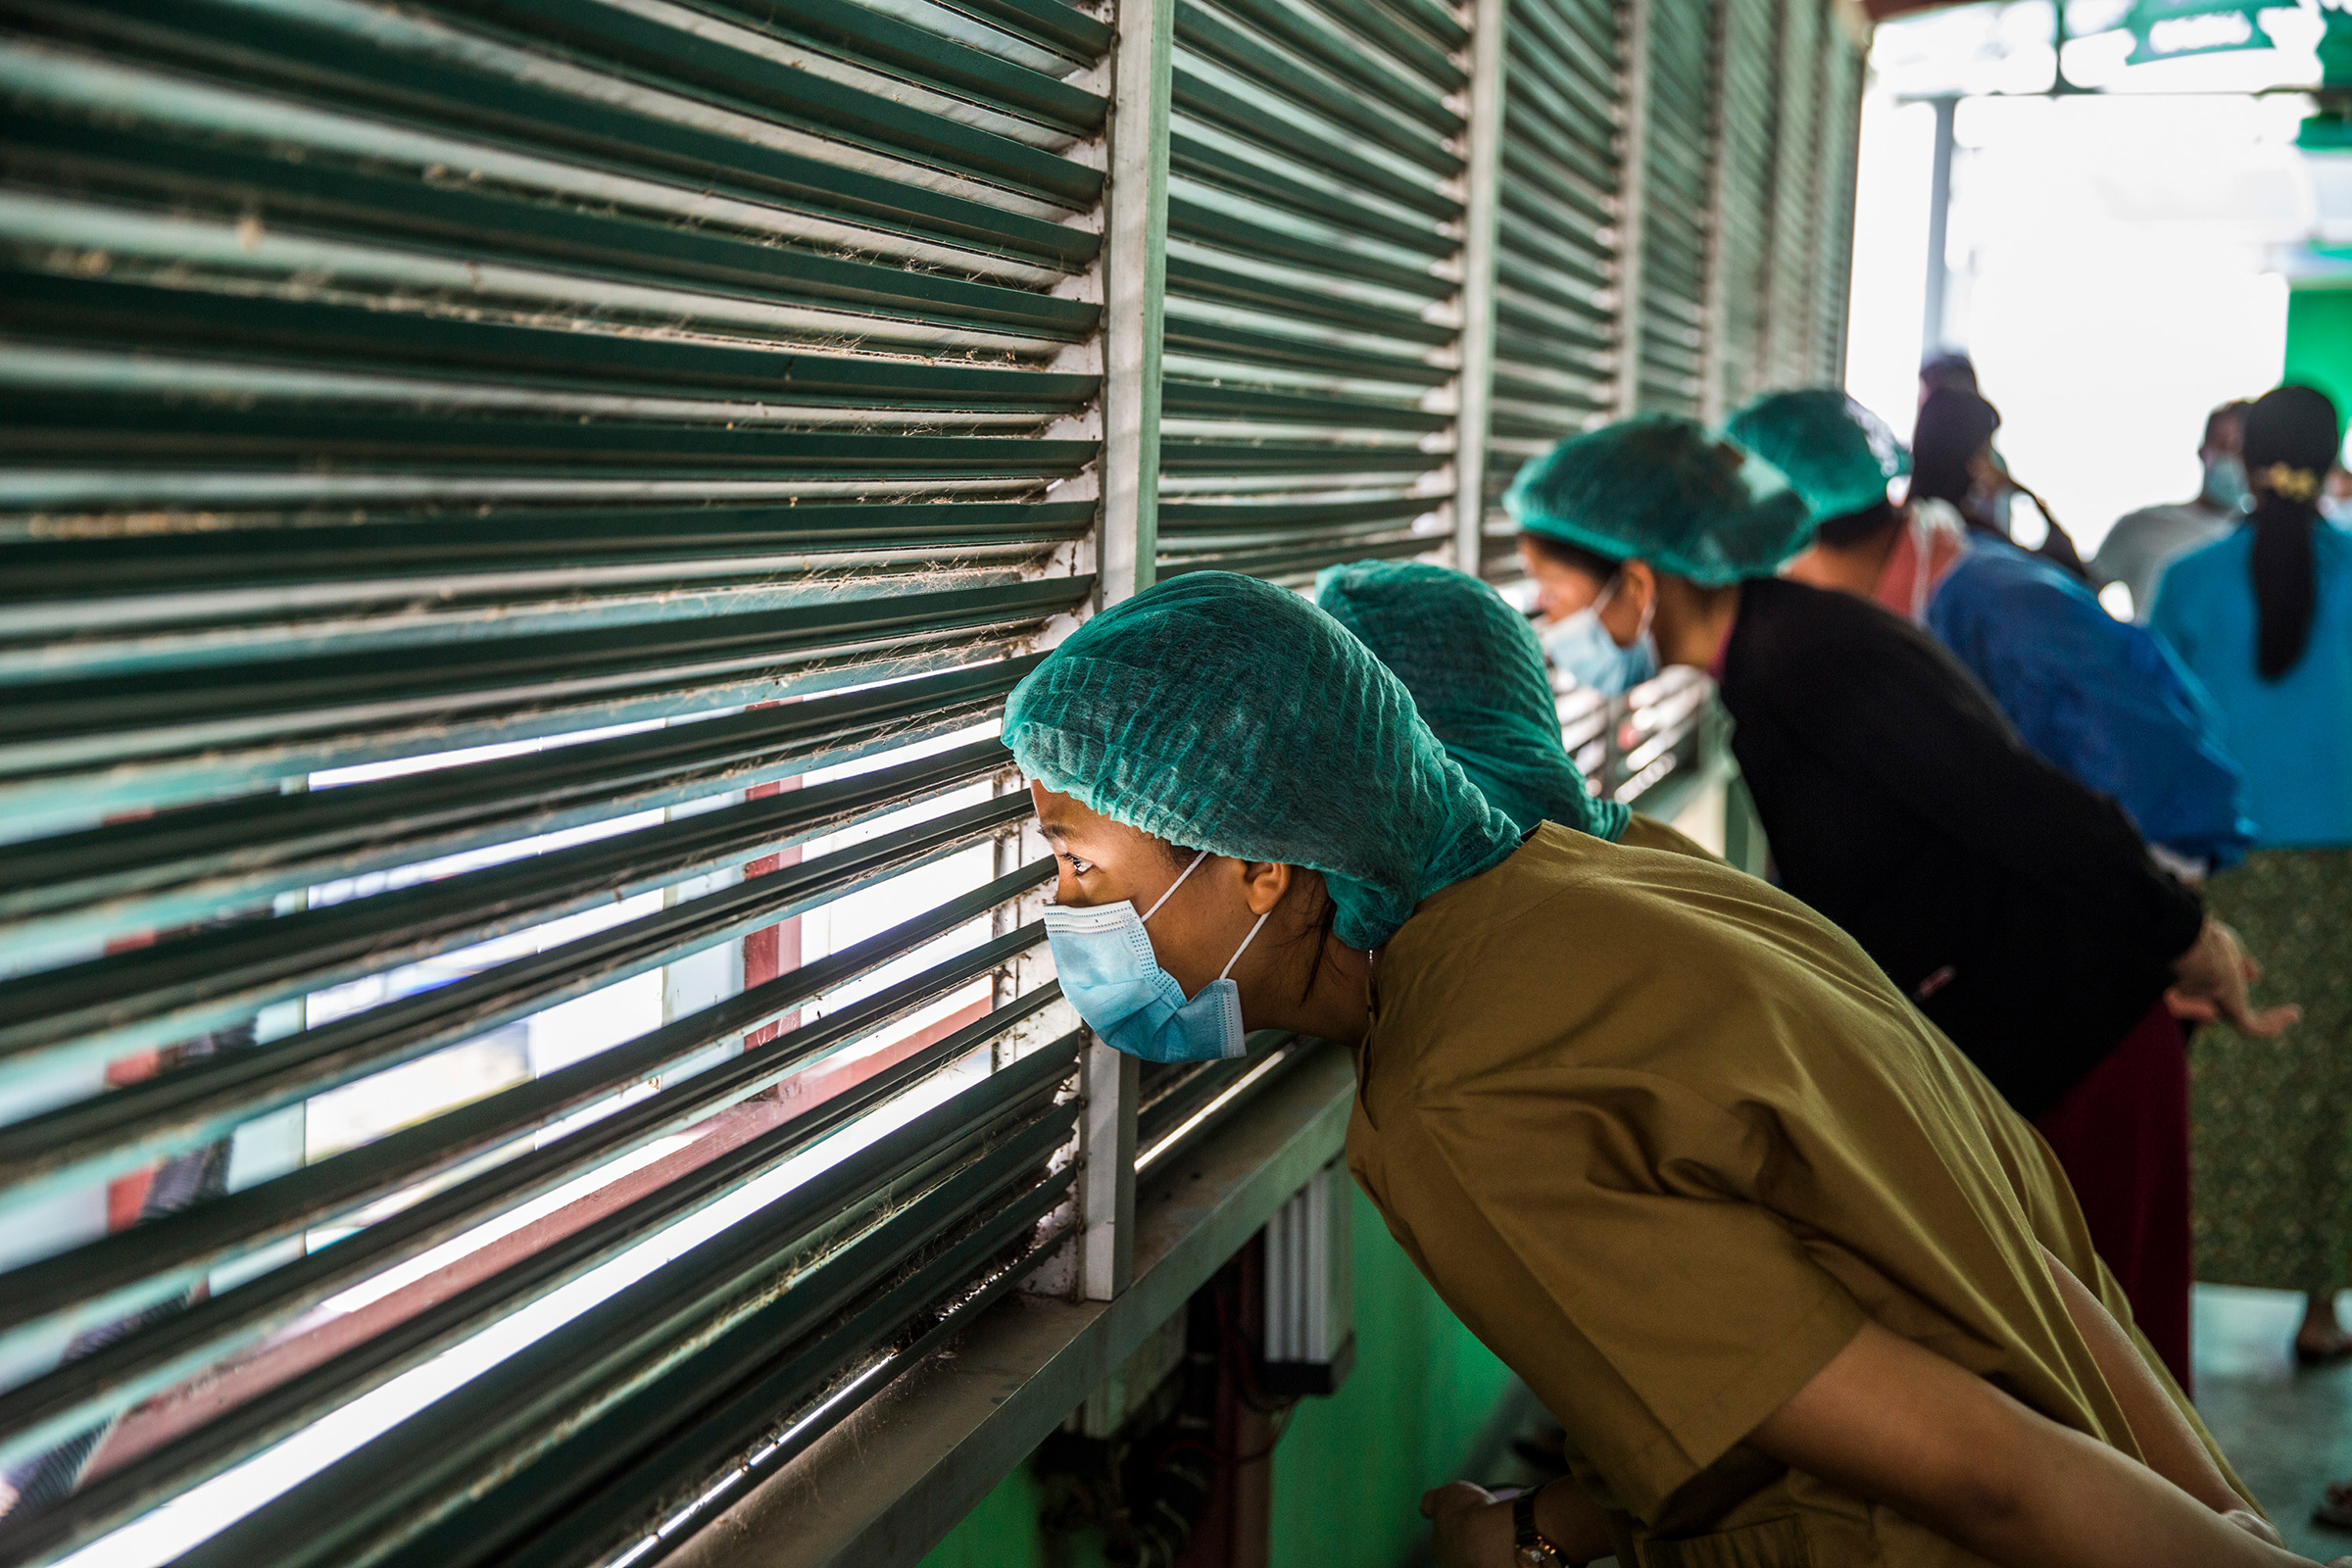 Health care workers watch protesters demonstrate against Myanmar's military coup in Myanmar's capital of Yangon, Feb. 28. (The New York Times)